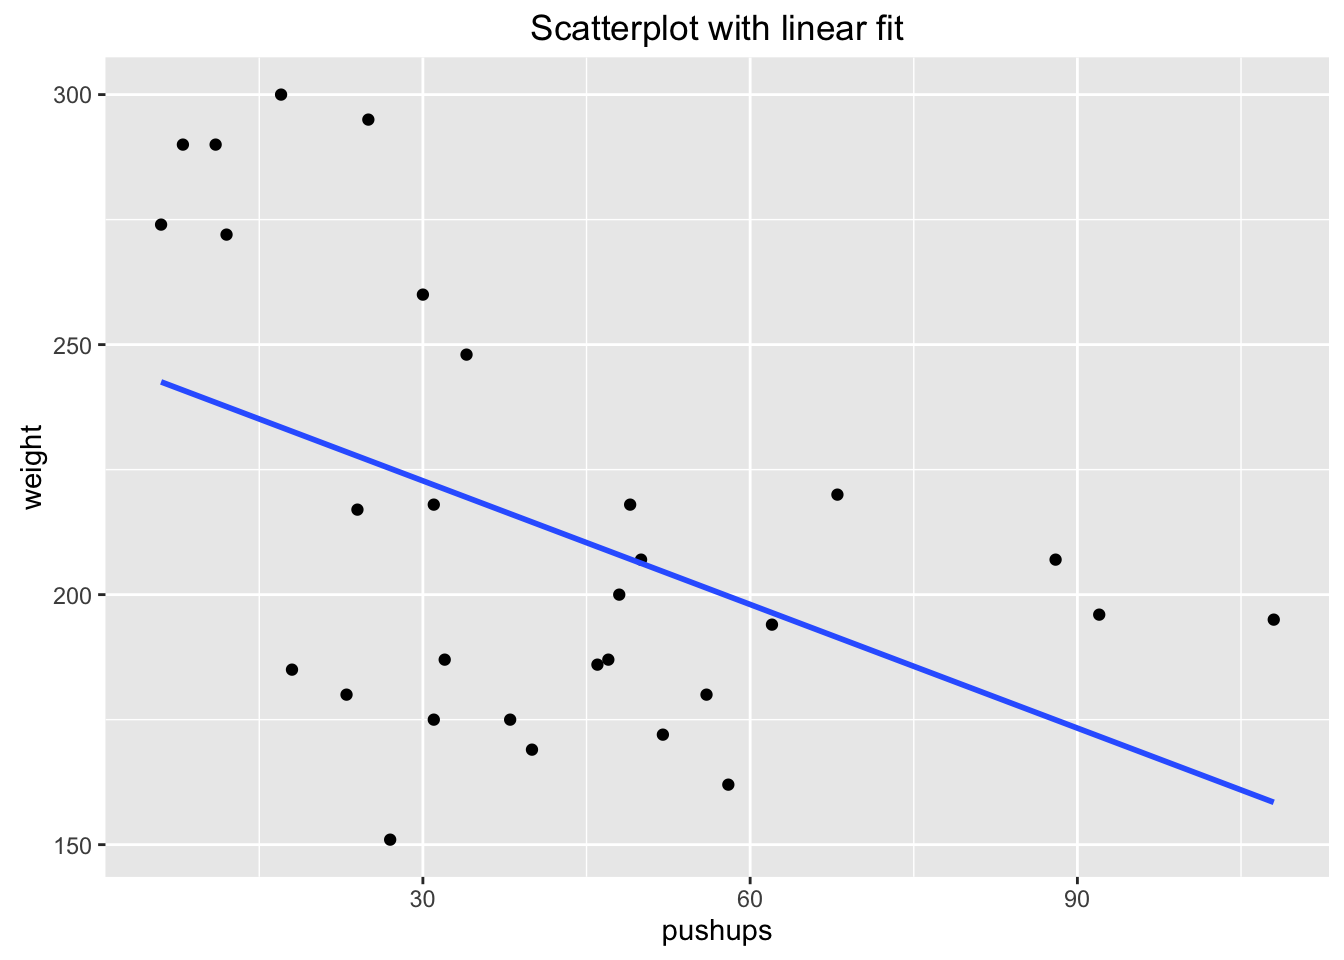 Pushups:  Scatterplot and Regression line for Pushups versus Weight Relationship